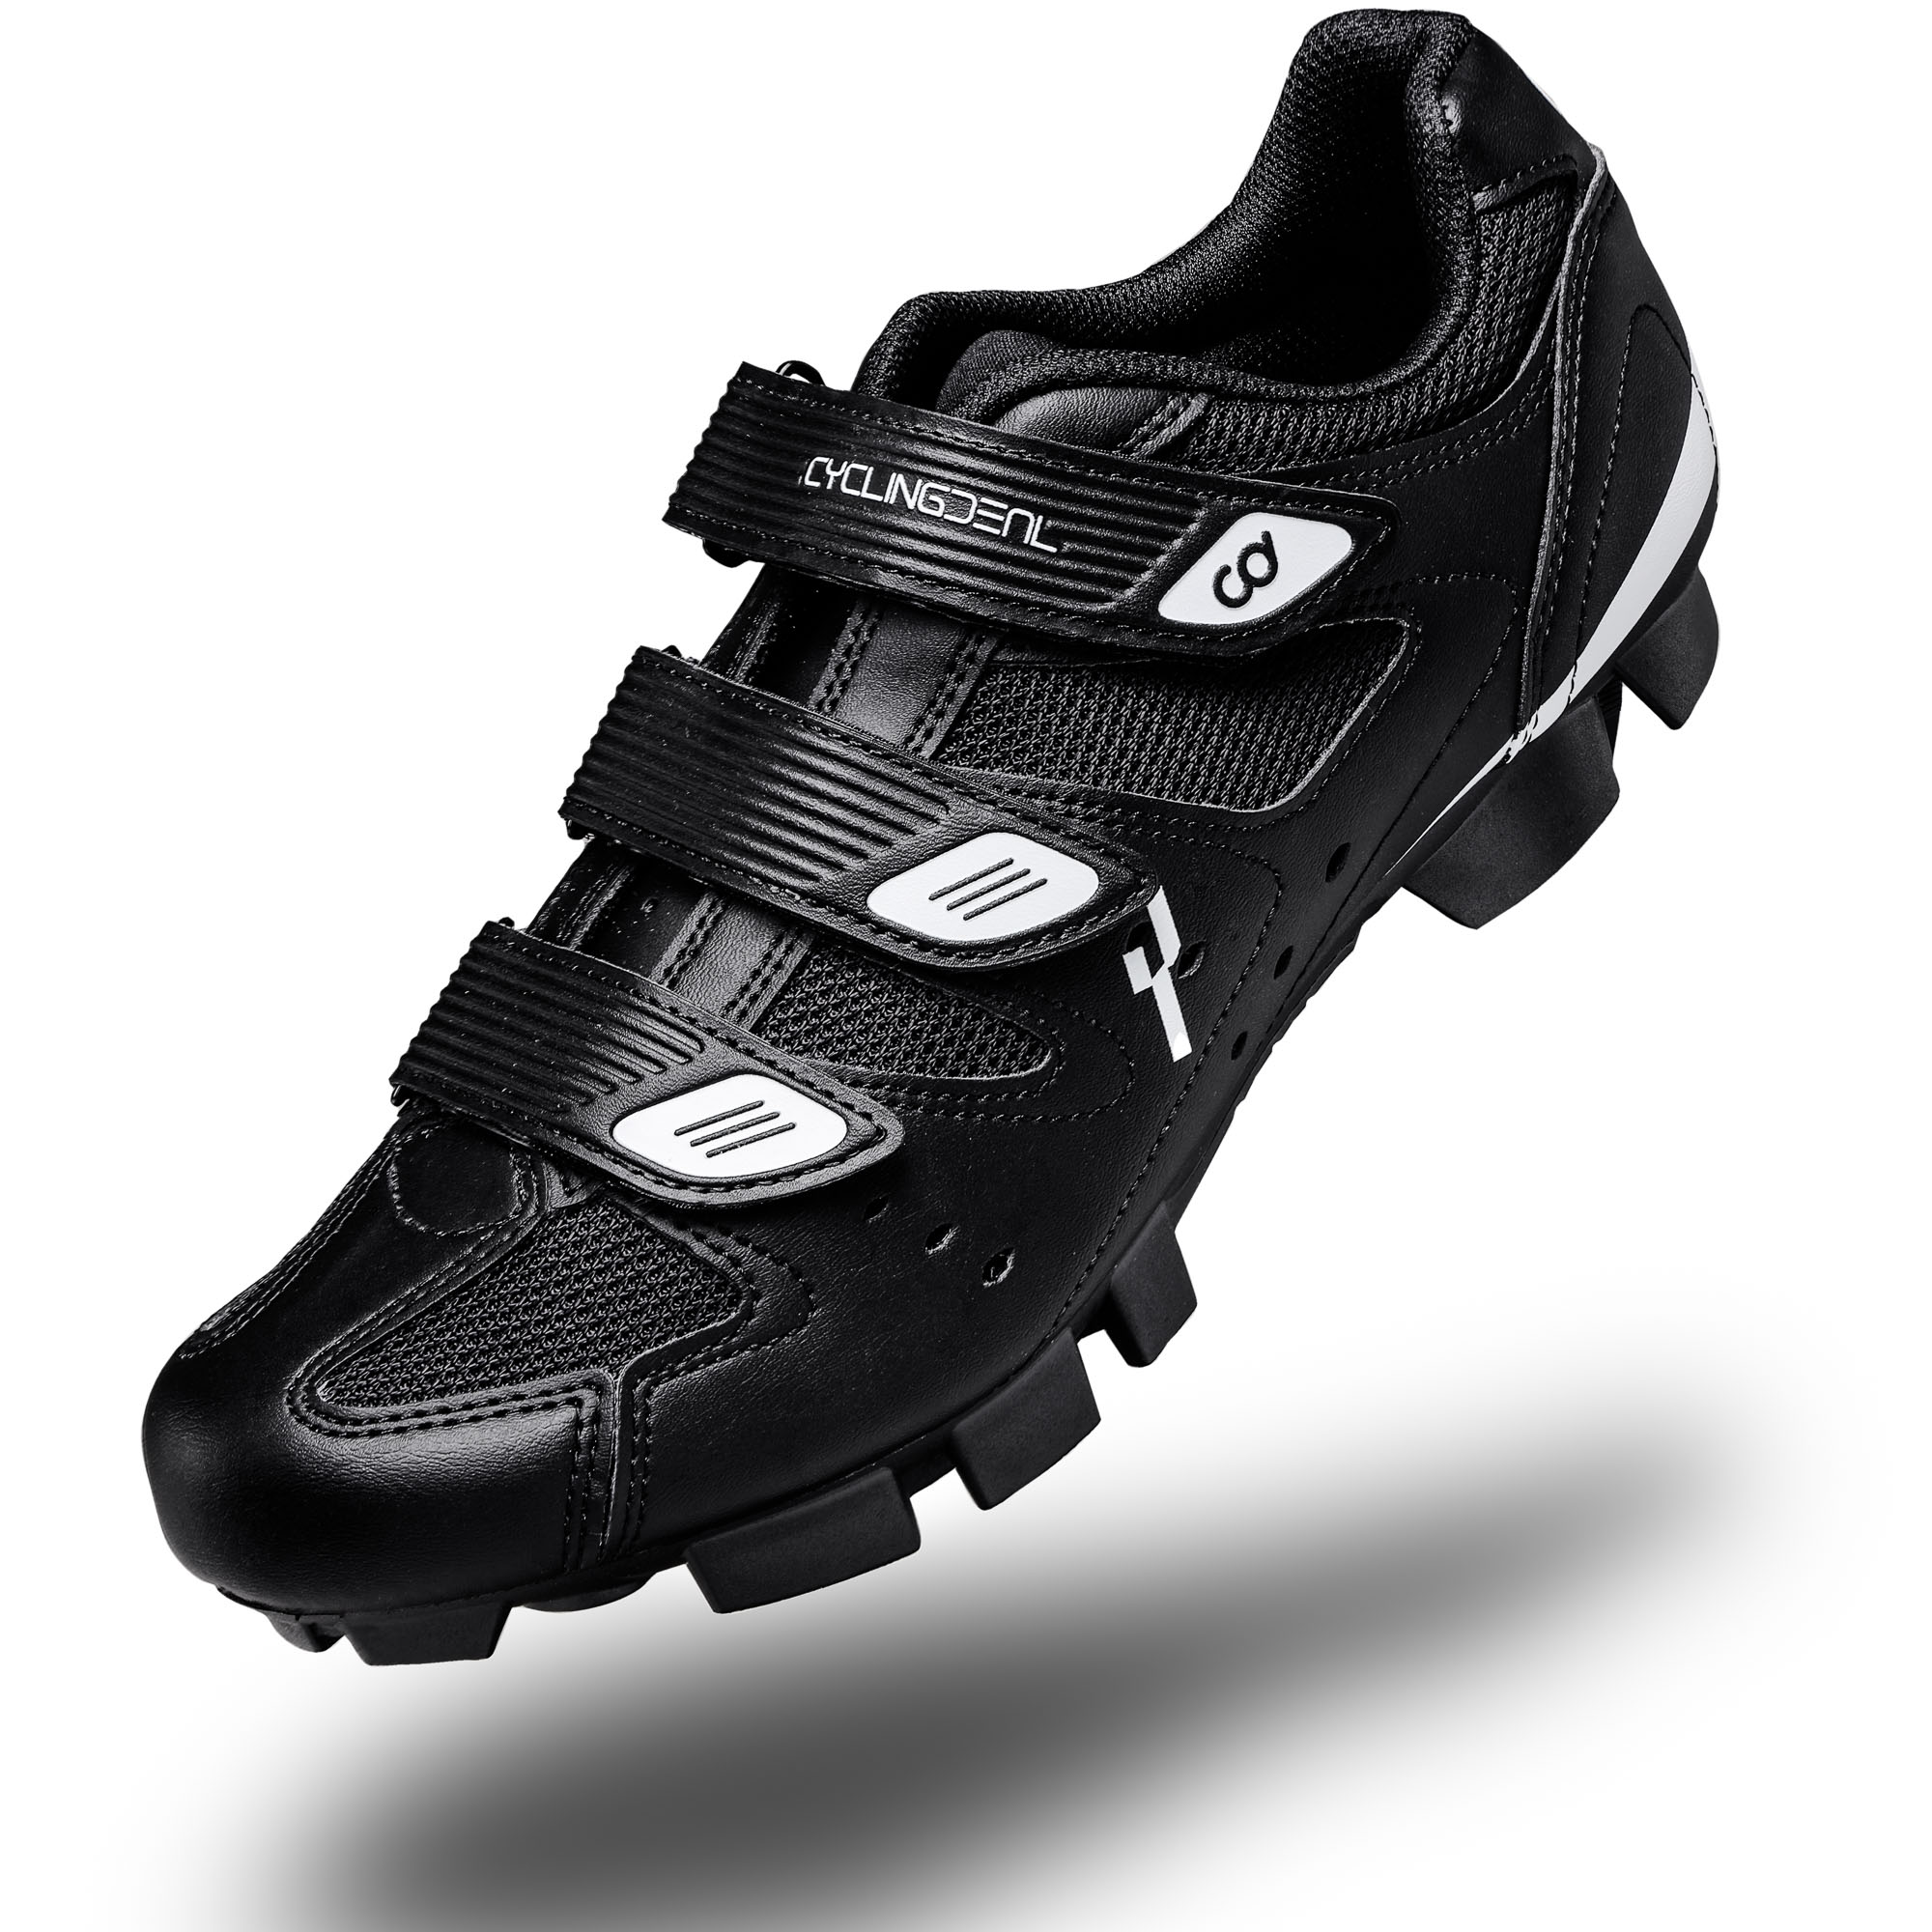 CyclingDeal Mountain Bicycle Bike Men's MTB Cycling Shoes Black Compatible with SHIMANO SPD and CrankBrothers Cleats | Size 43